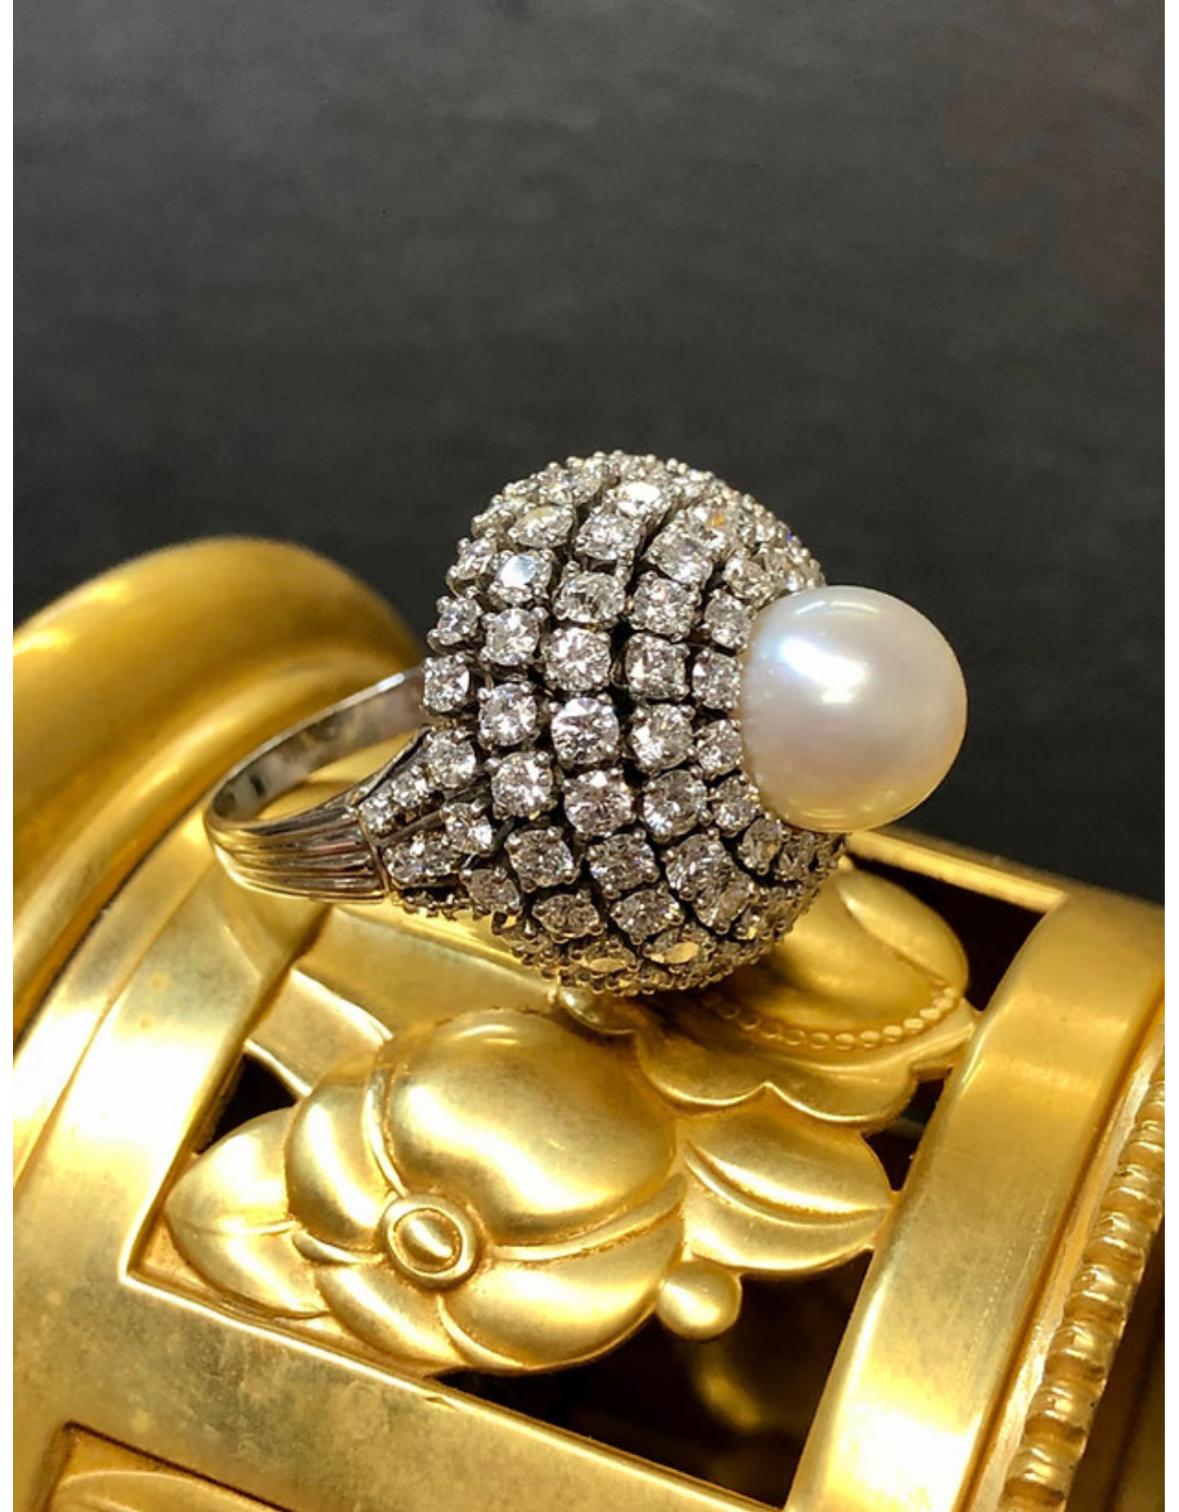 A knockout vintage 1950’s dome ring done in platinum and set with approximately 6.70cttw in G-J color Vs1-2 clarity round diamonds and centered by a 10mm Pearl.

Condition
All stones are secure and in very wearable condition.

Dimensions
.90” in